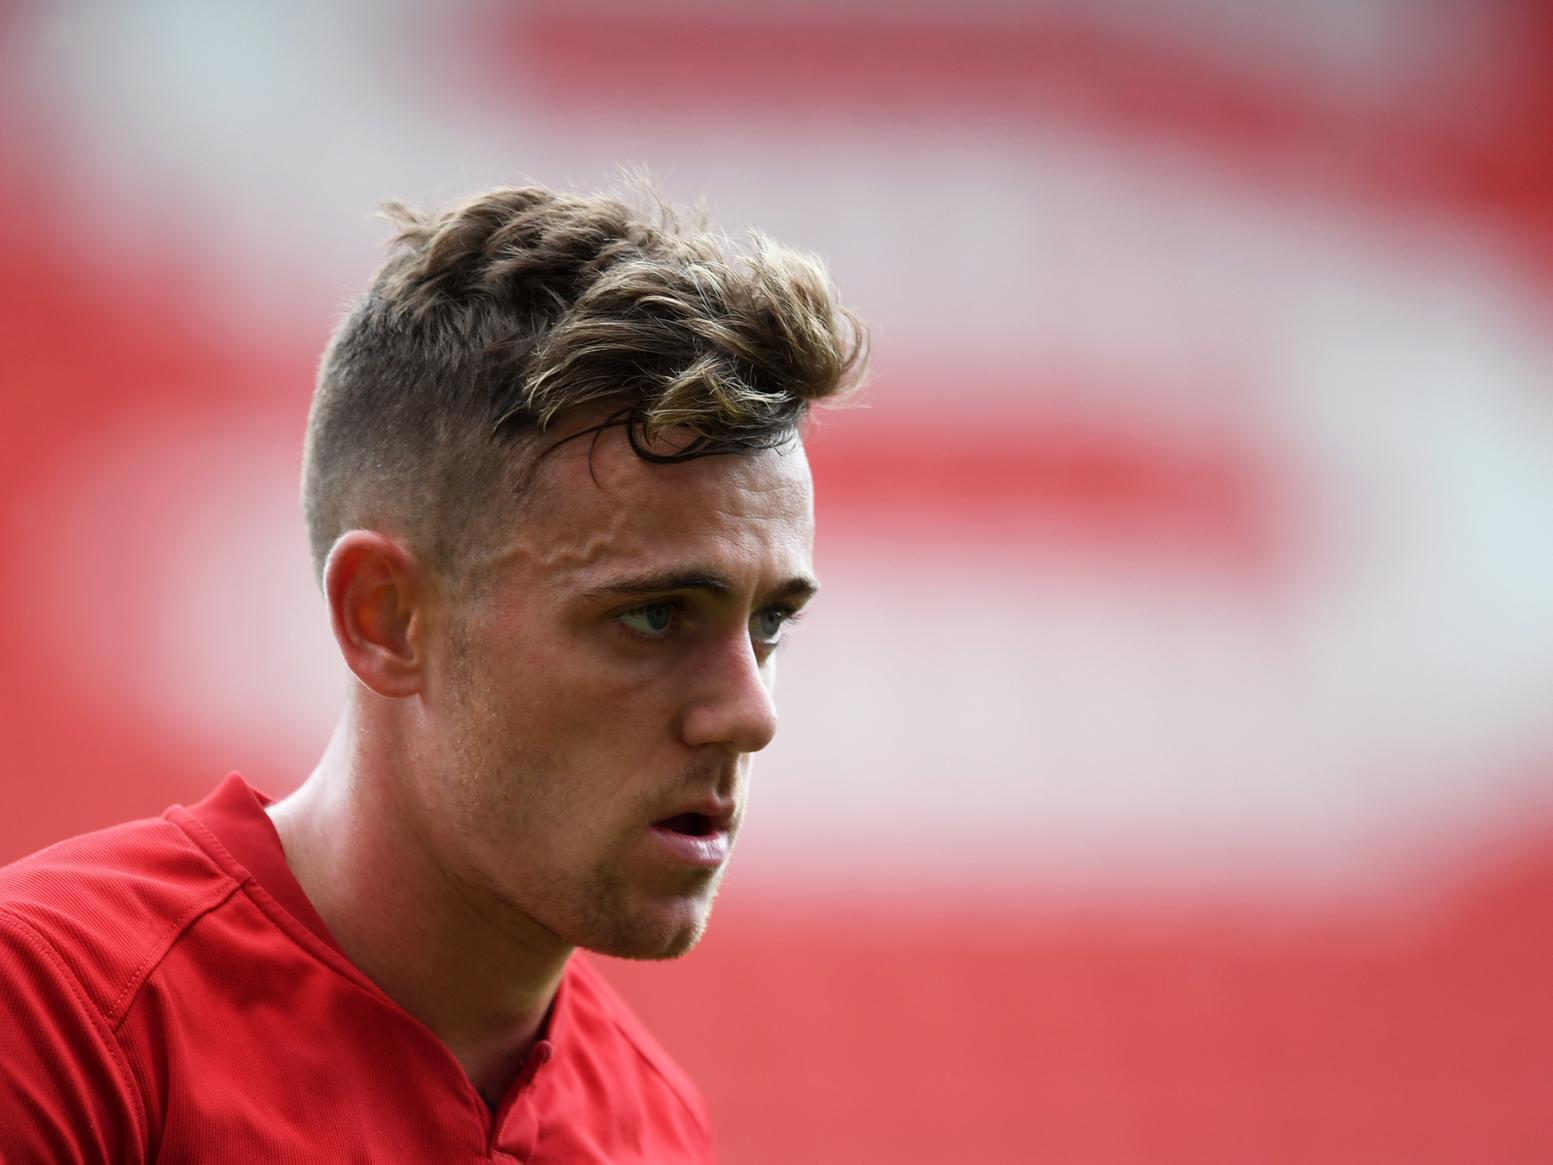 Huddersfield Town have been linked with a move for Bristol City's versatile attacker Sammie Szmodics - but a deal isnt thought to be close. (Examiner Live)